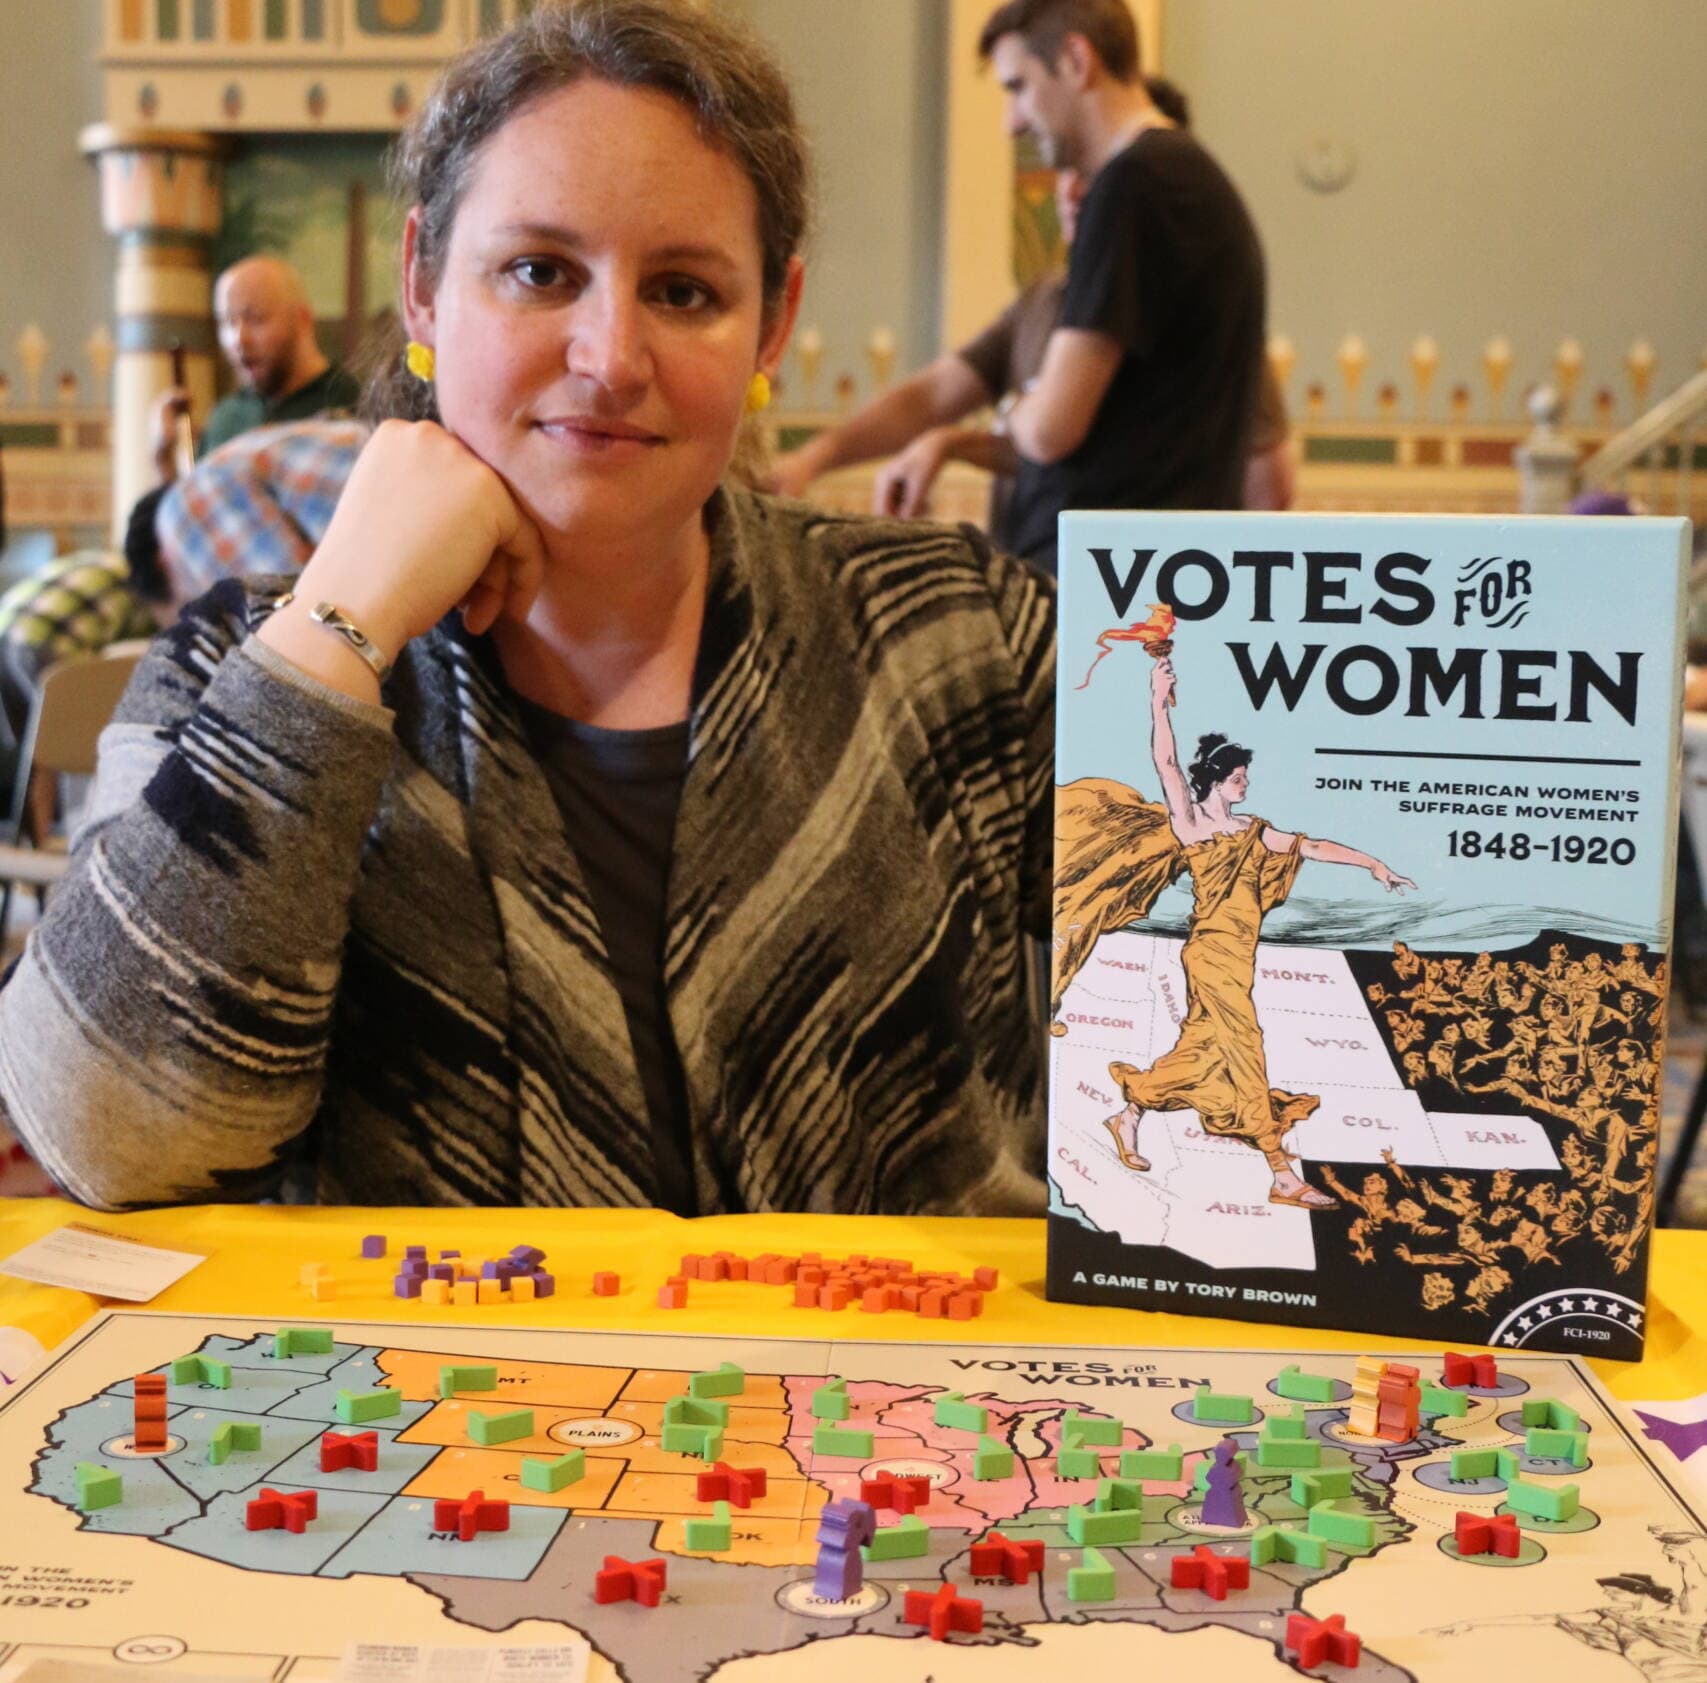 "Votes for Women" and its designer, Tory Brown (Courtesy Bradley Herring)